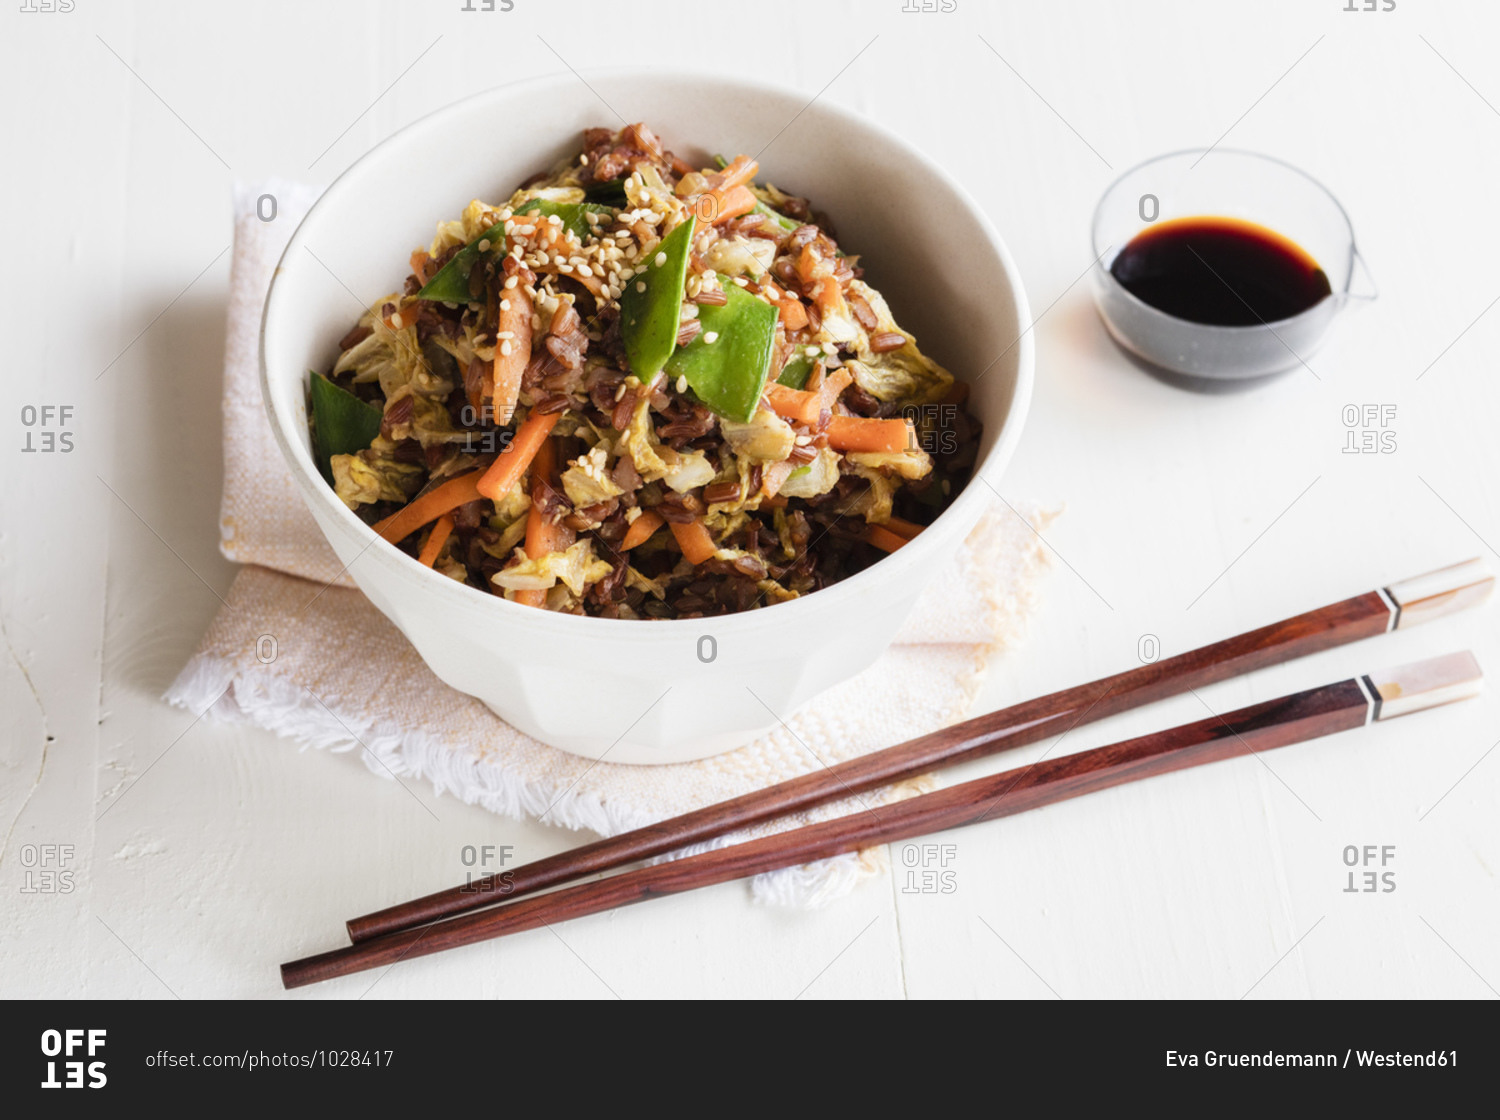 Chopsticks and bowl of fried red rice with vegetables